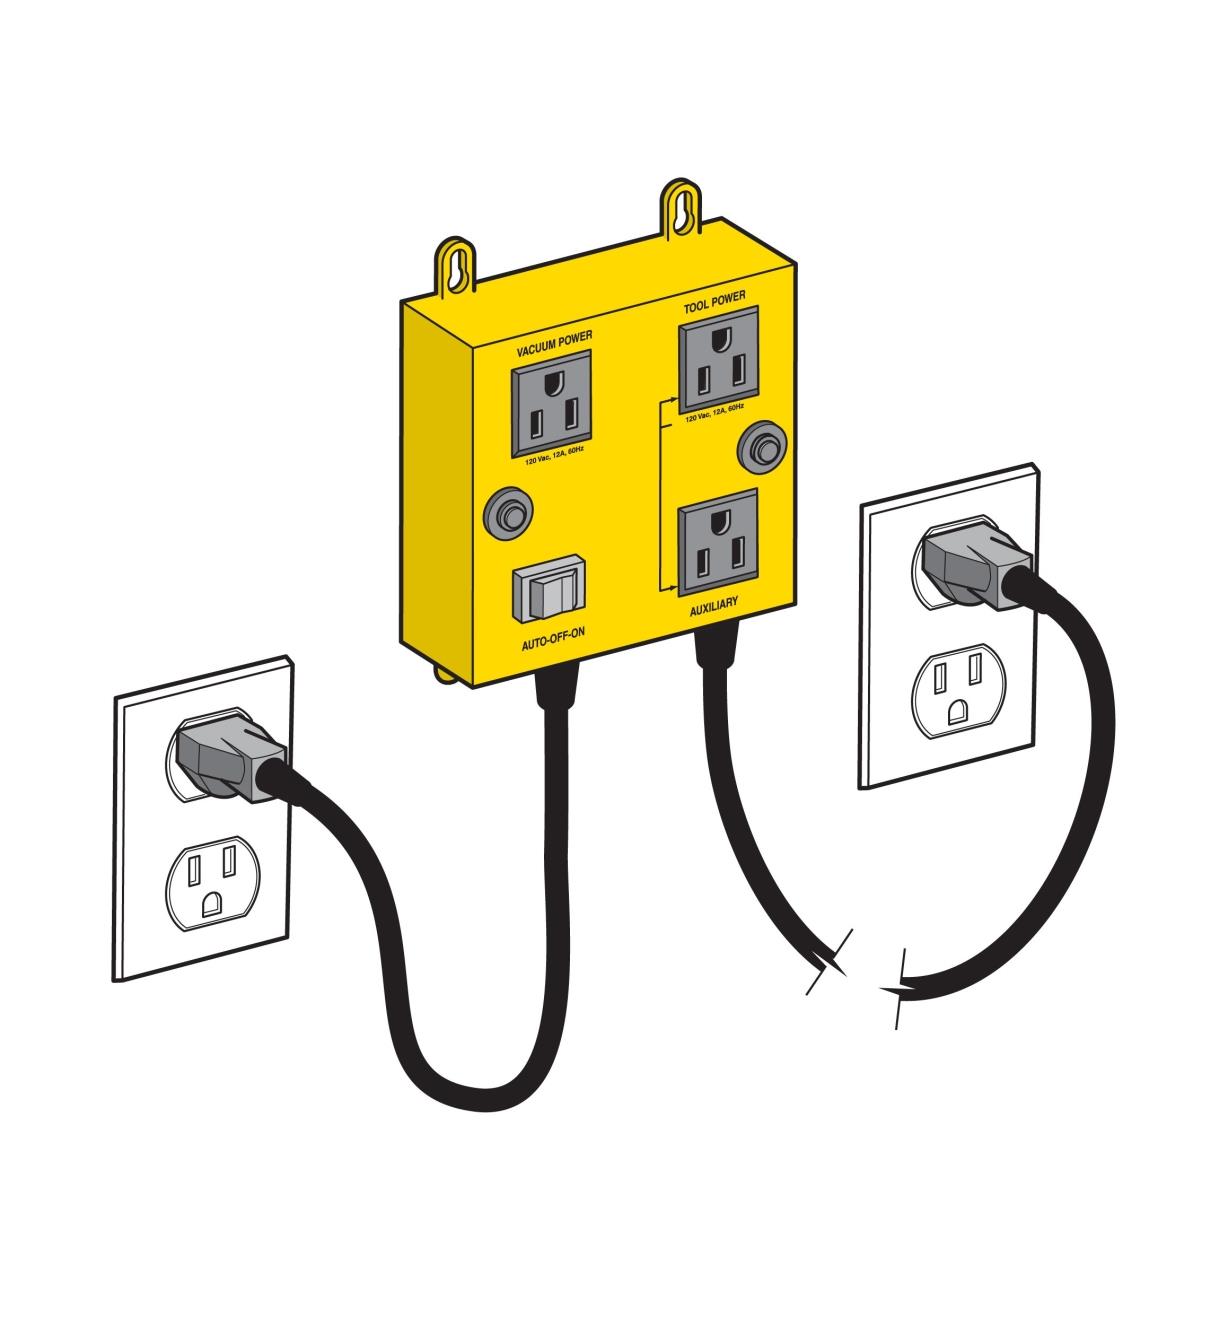 Illustration of switch with two cords plugged into separate outlets